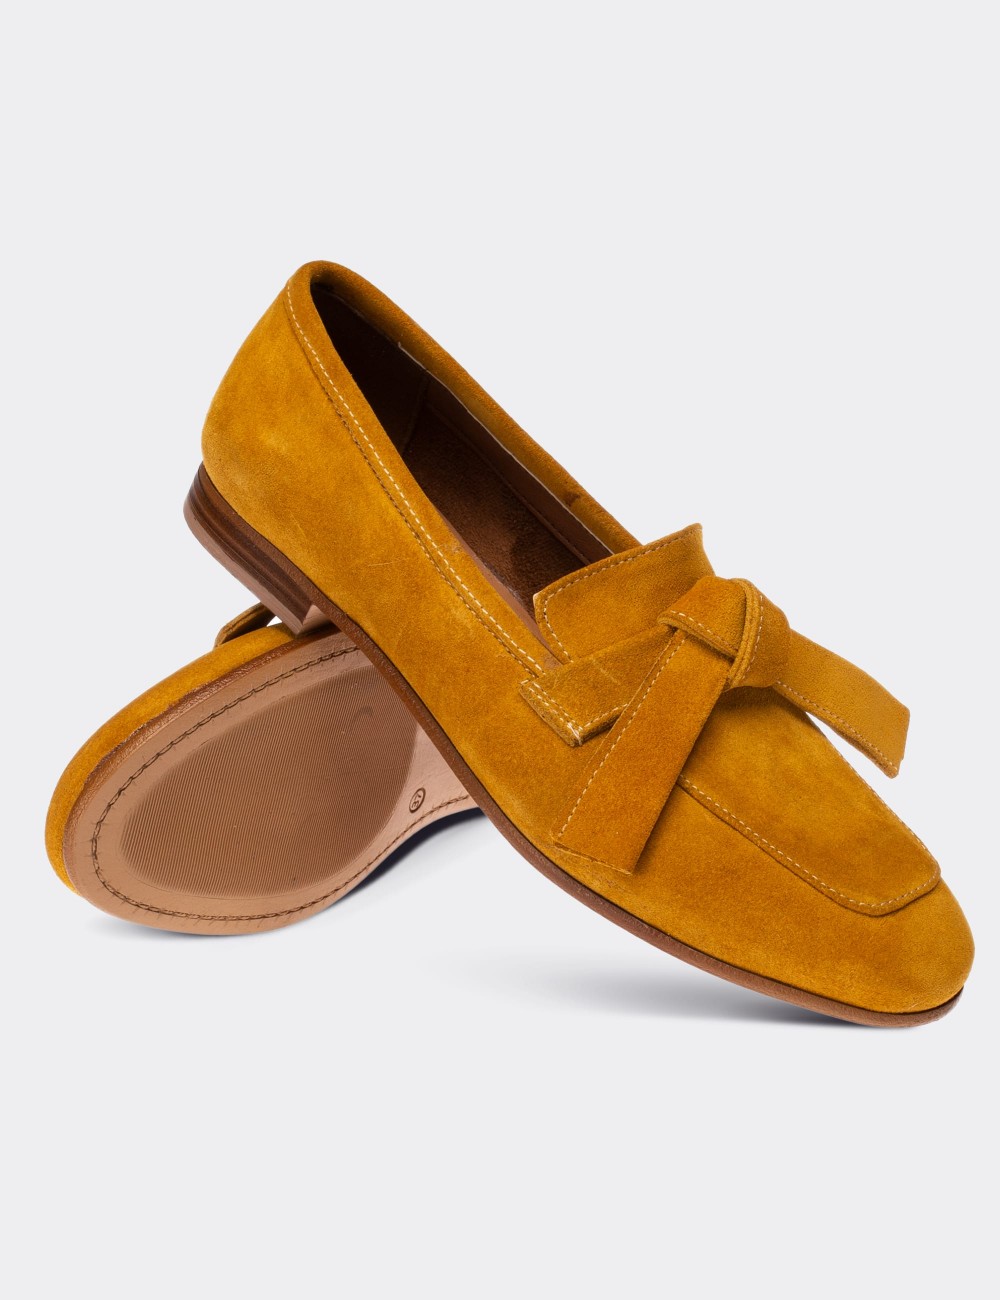 Yellow Suede Leather Loafers - 01744ZHRDM01